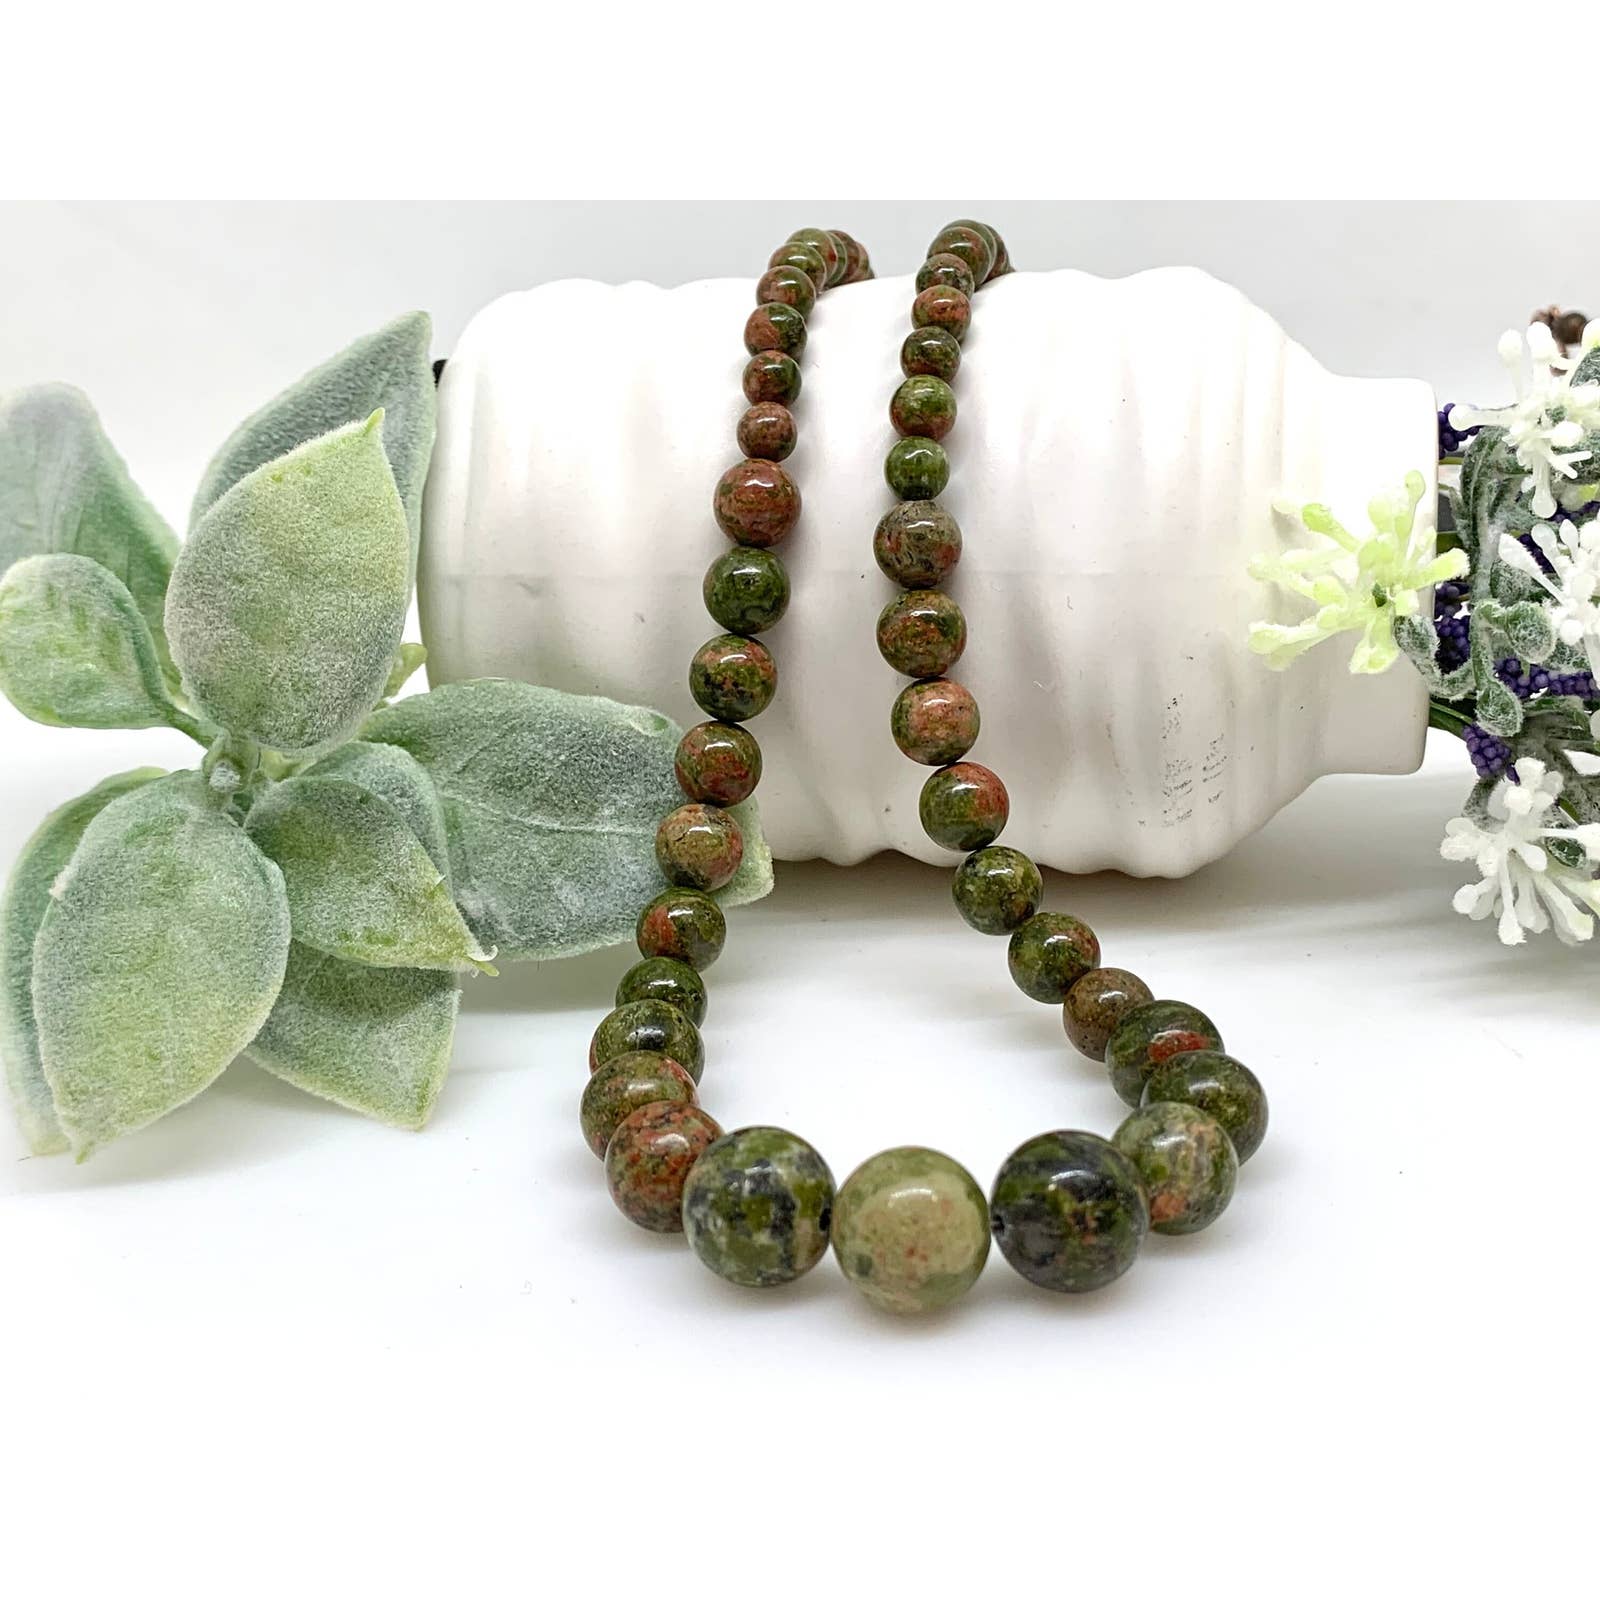 Unakite Necklace - Natural Stones Jewelry